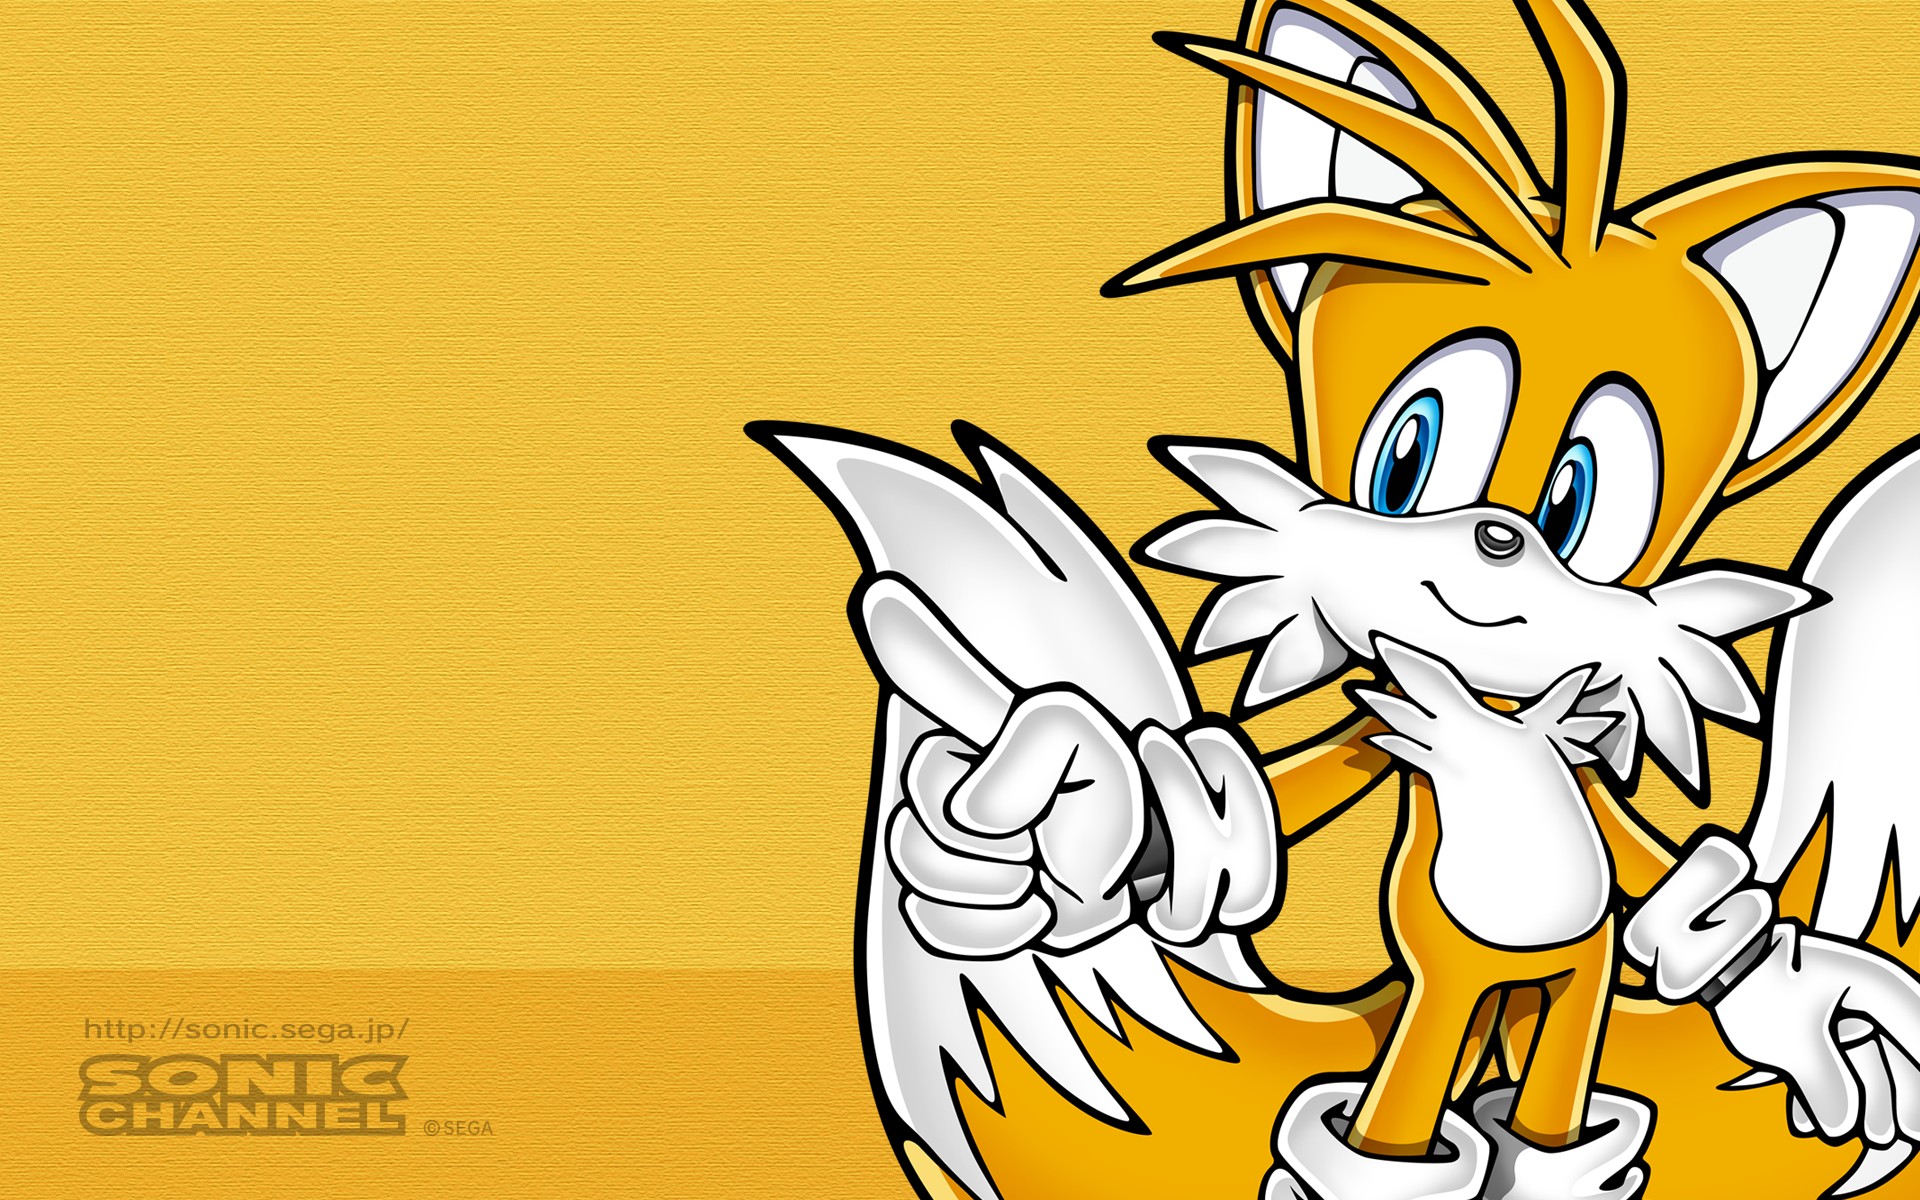 Tails (character), Sonic the Hedgehog, Sega Wallpapers HD / Desktop and Mob...